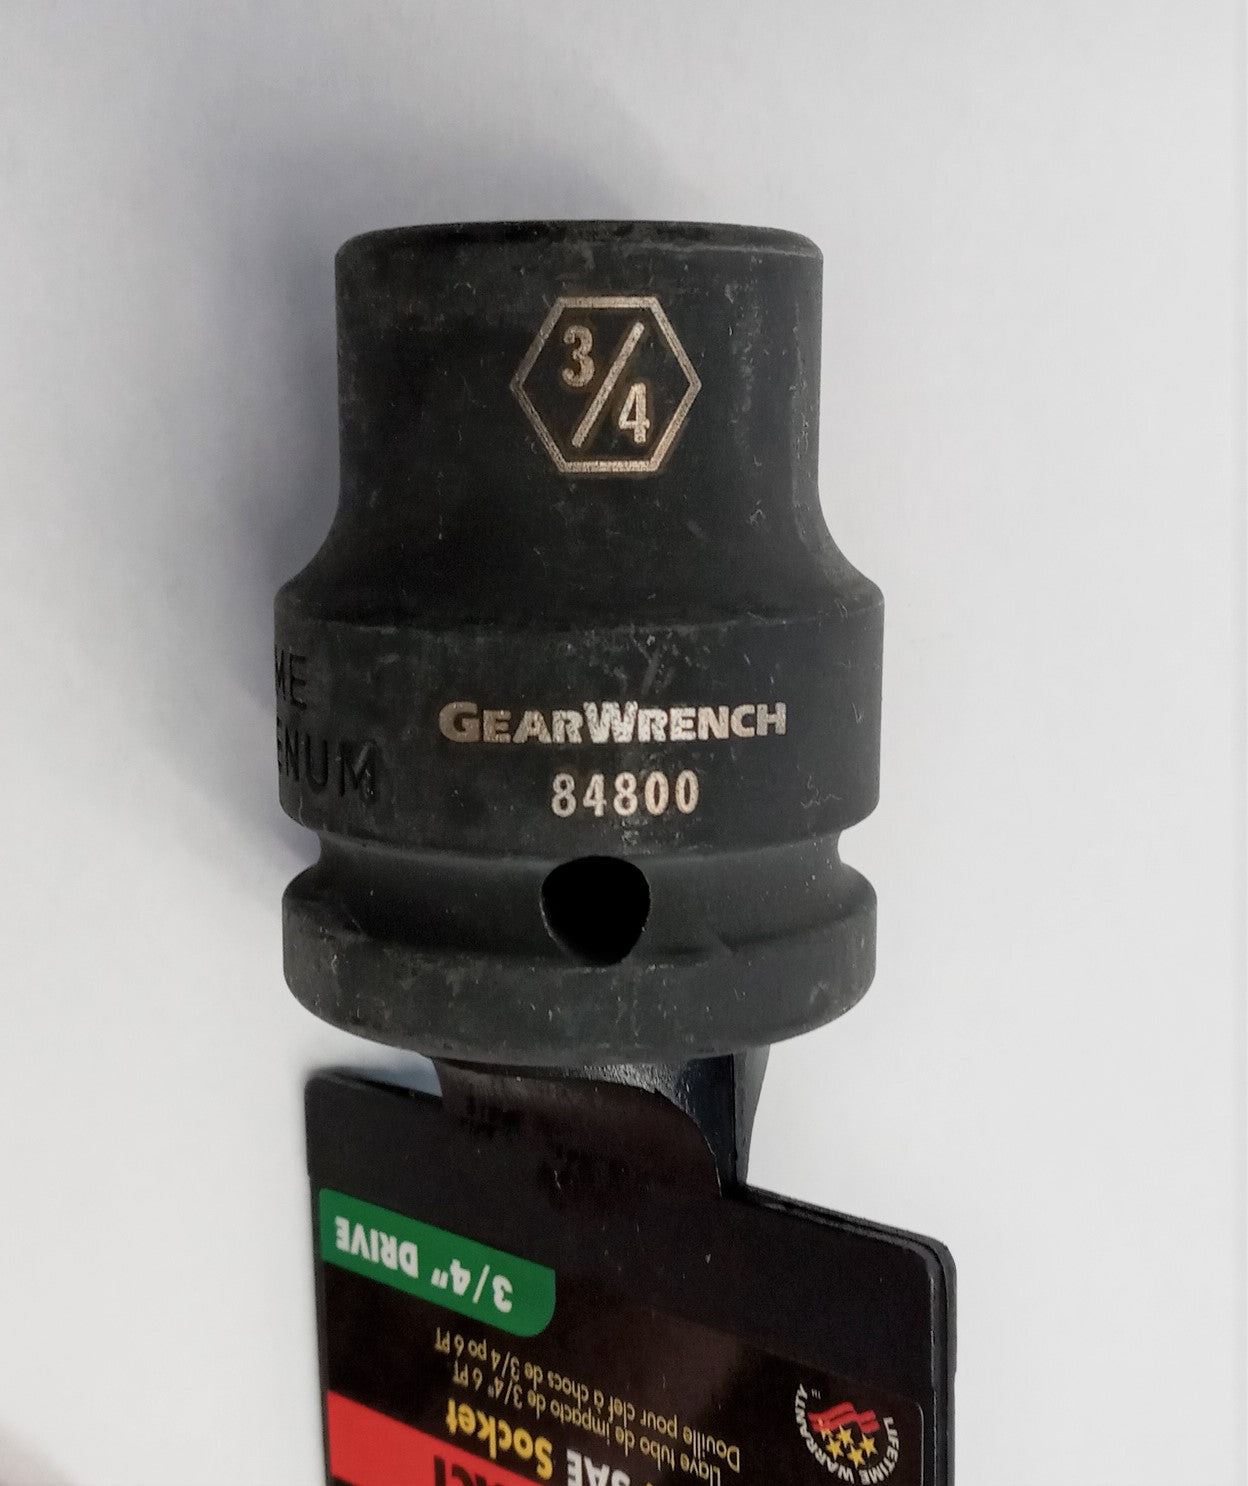 Gearwrench 84800 3/4" Drive 6 Point Standard Impact SAE Socket 3/4"